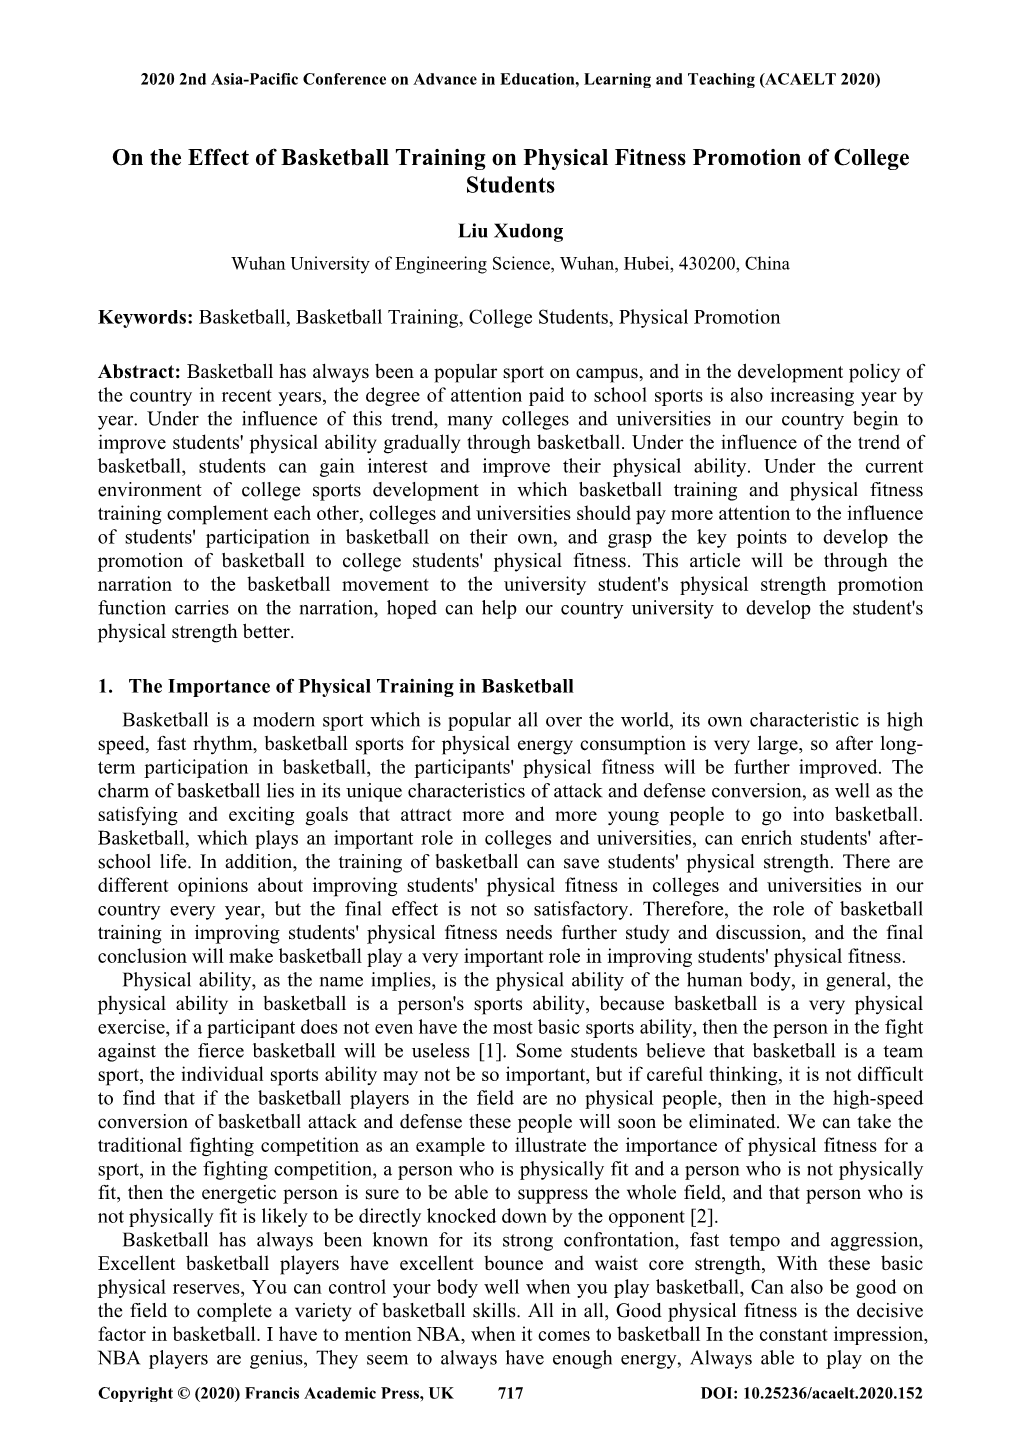 On the Effect of Basketball Training on Physical Fitness Promotion of College Students